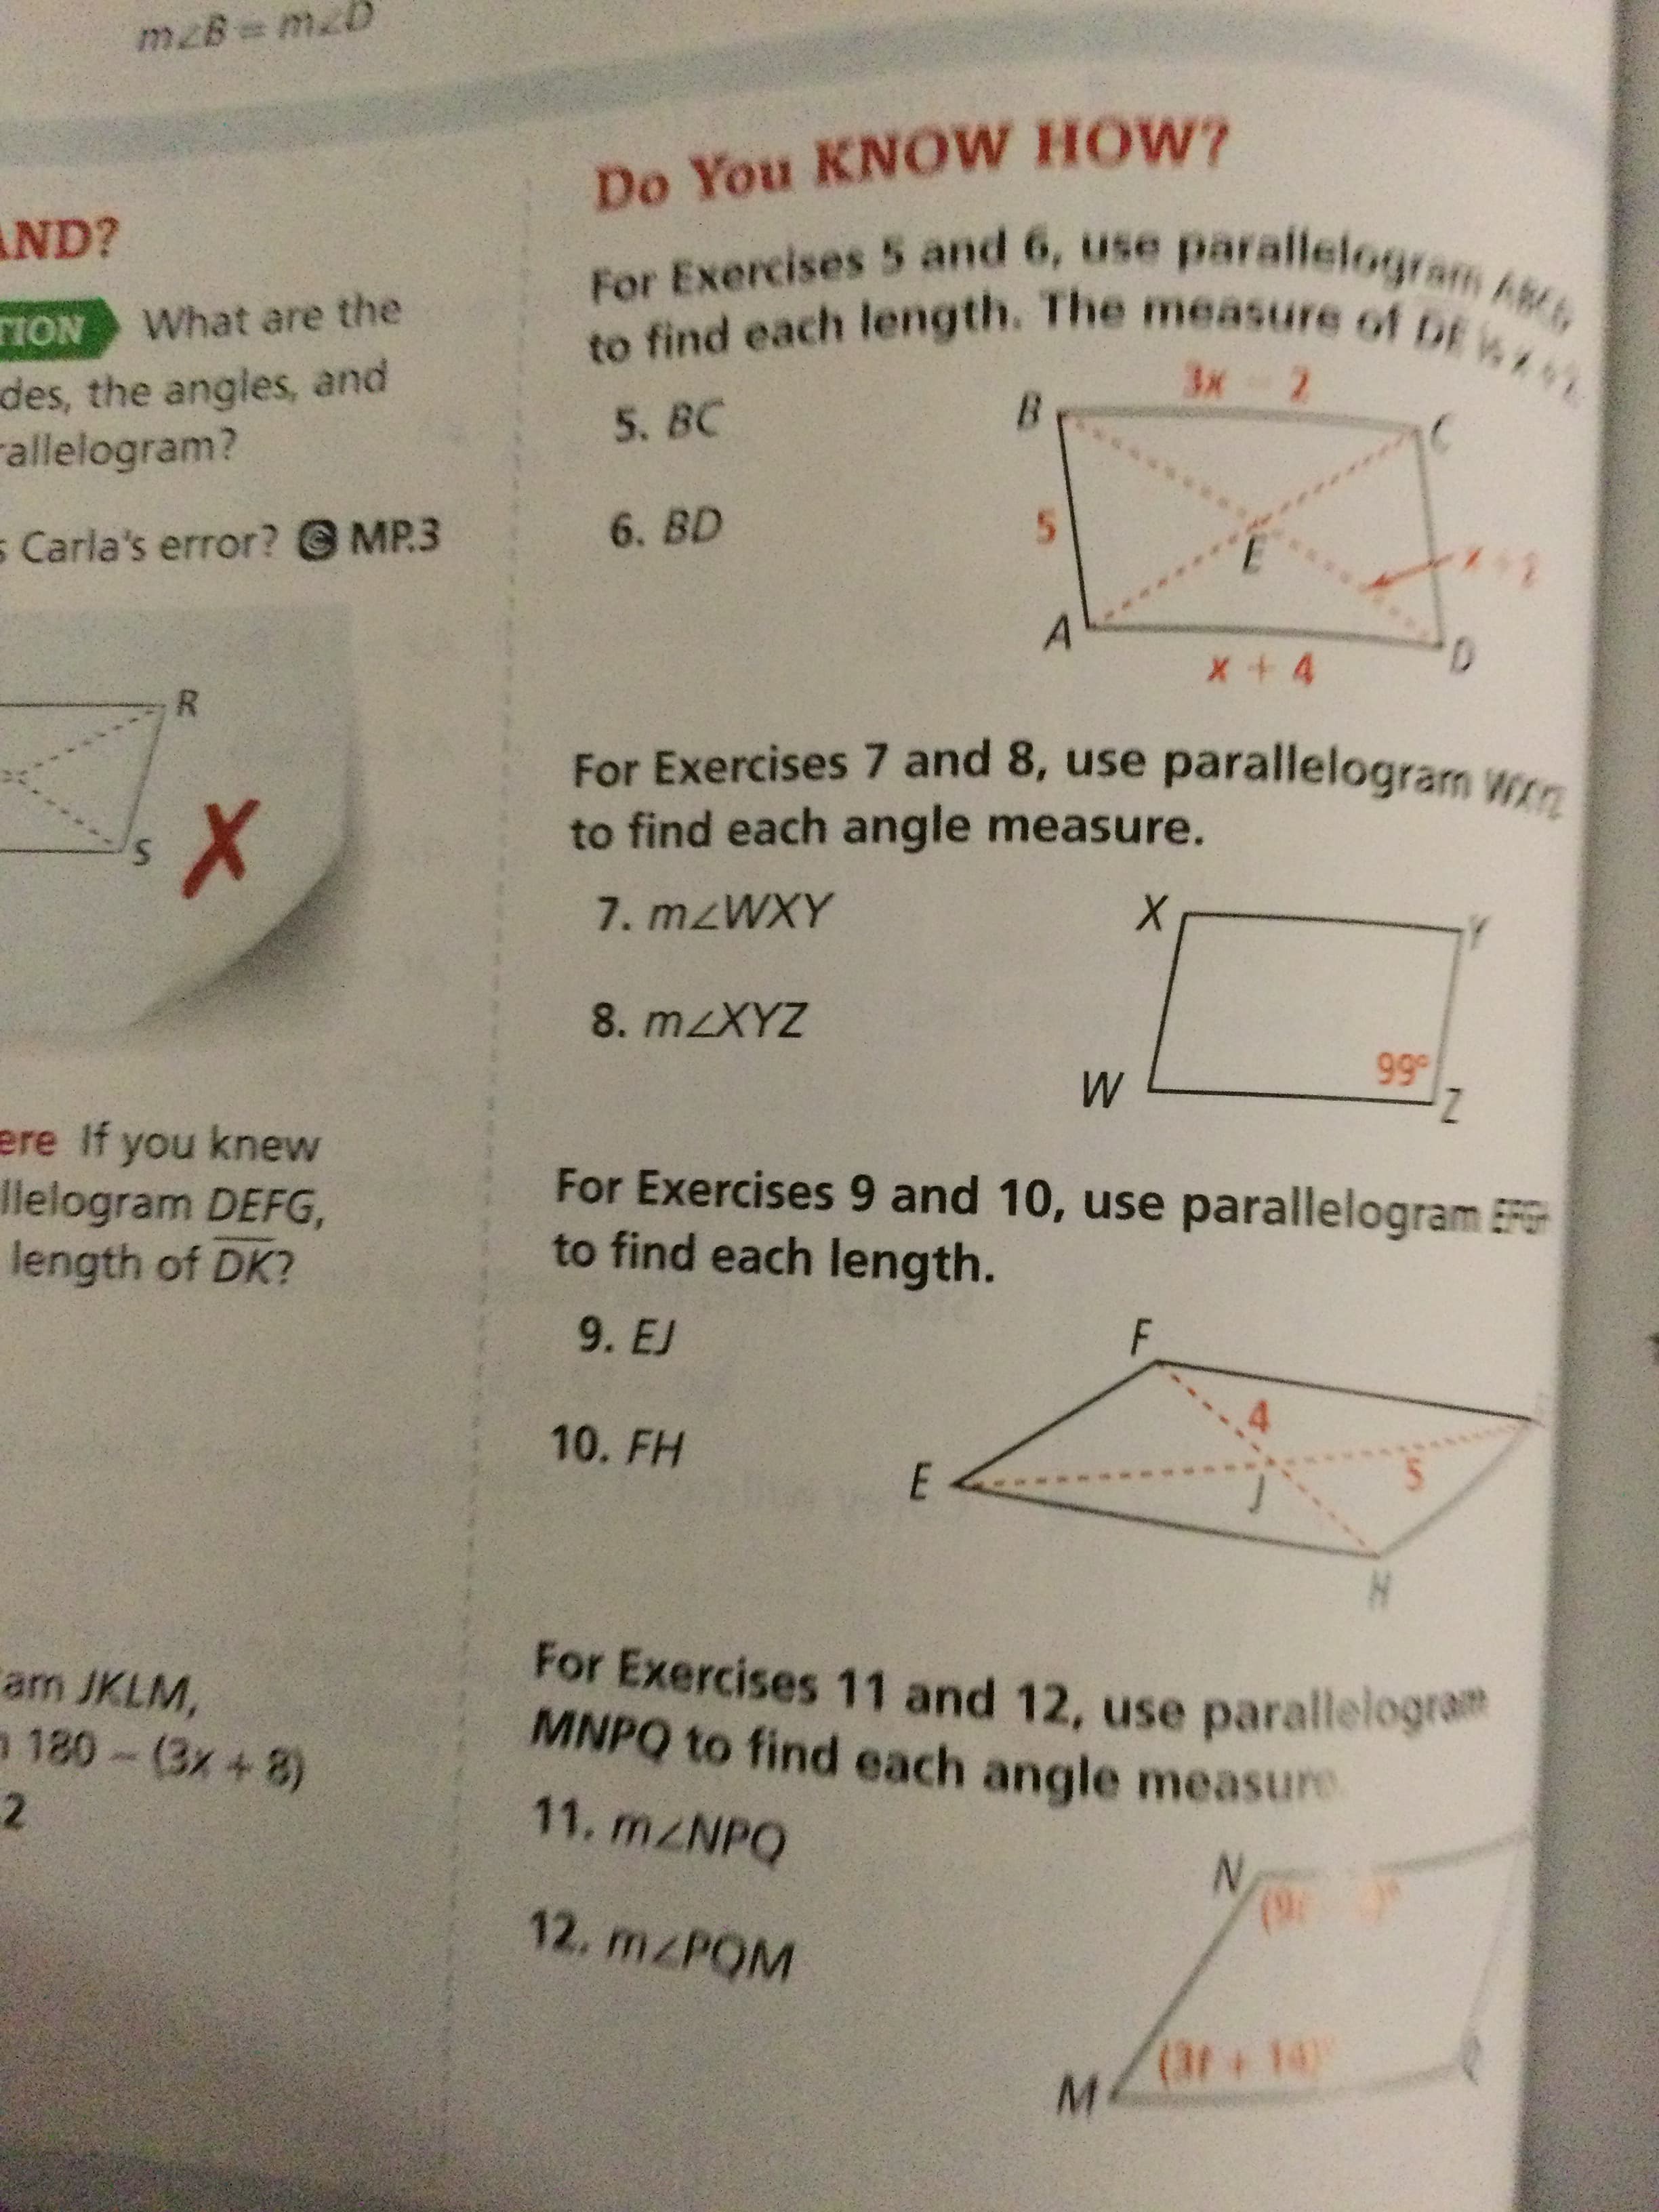 mzB=
Do You KNOW HOW?
AND?
TION
What are the
des, the angles, and
rallelogram?
3x- 2
5. BC
s Carla's error? @ MP3
6. BD
5.
R.
For Exercises 7 and 8, use parallelogram WEn
to find each angle measure.
8. mzXYZ
66
ere If you knew
llelogram DEFG,
length of DK?
For Exercises 9 and 10, use parallelogram EFG
to find each length.
9. EJ
F.
10. FH
am JKLM,
MNPQ to find each angle measure
11. M/NPQ
2.
12. M PQM
N.
